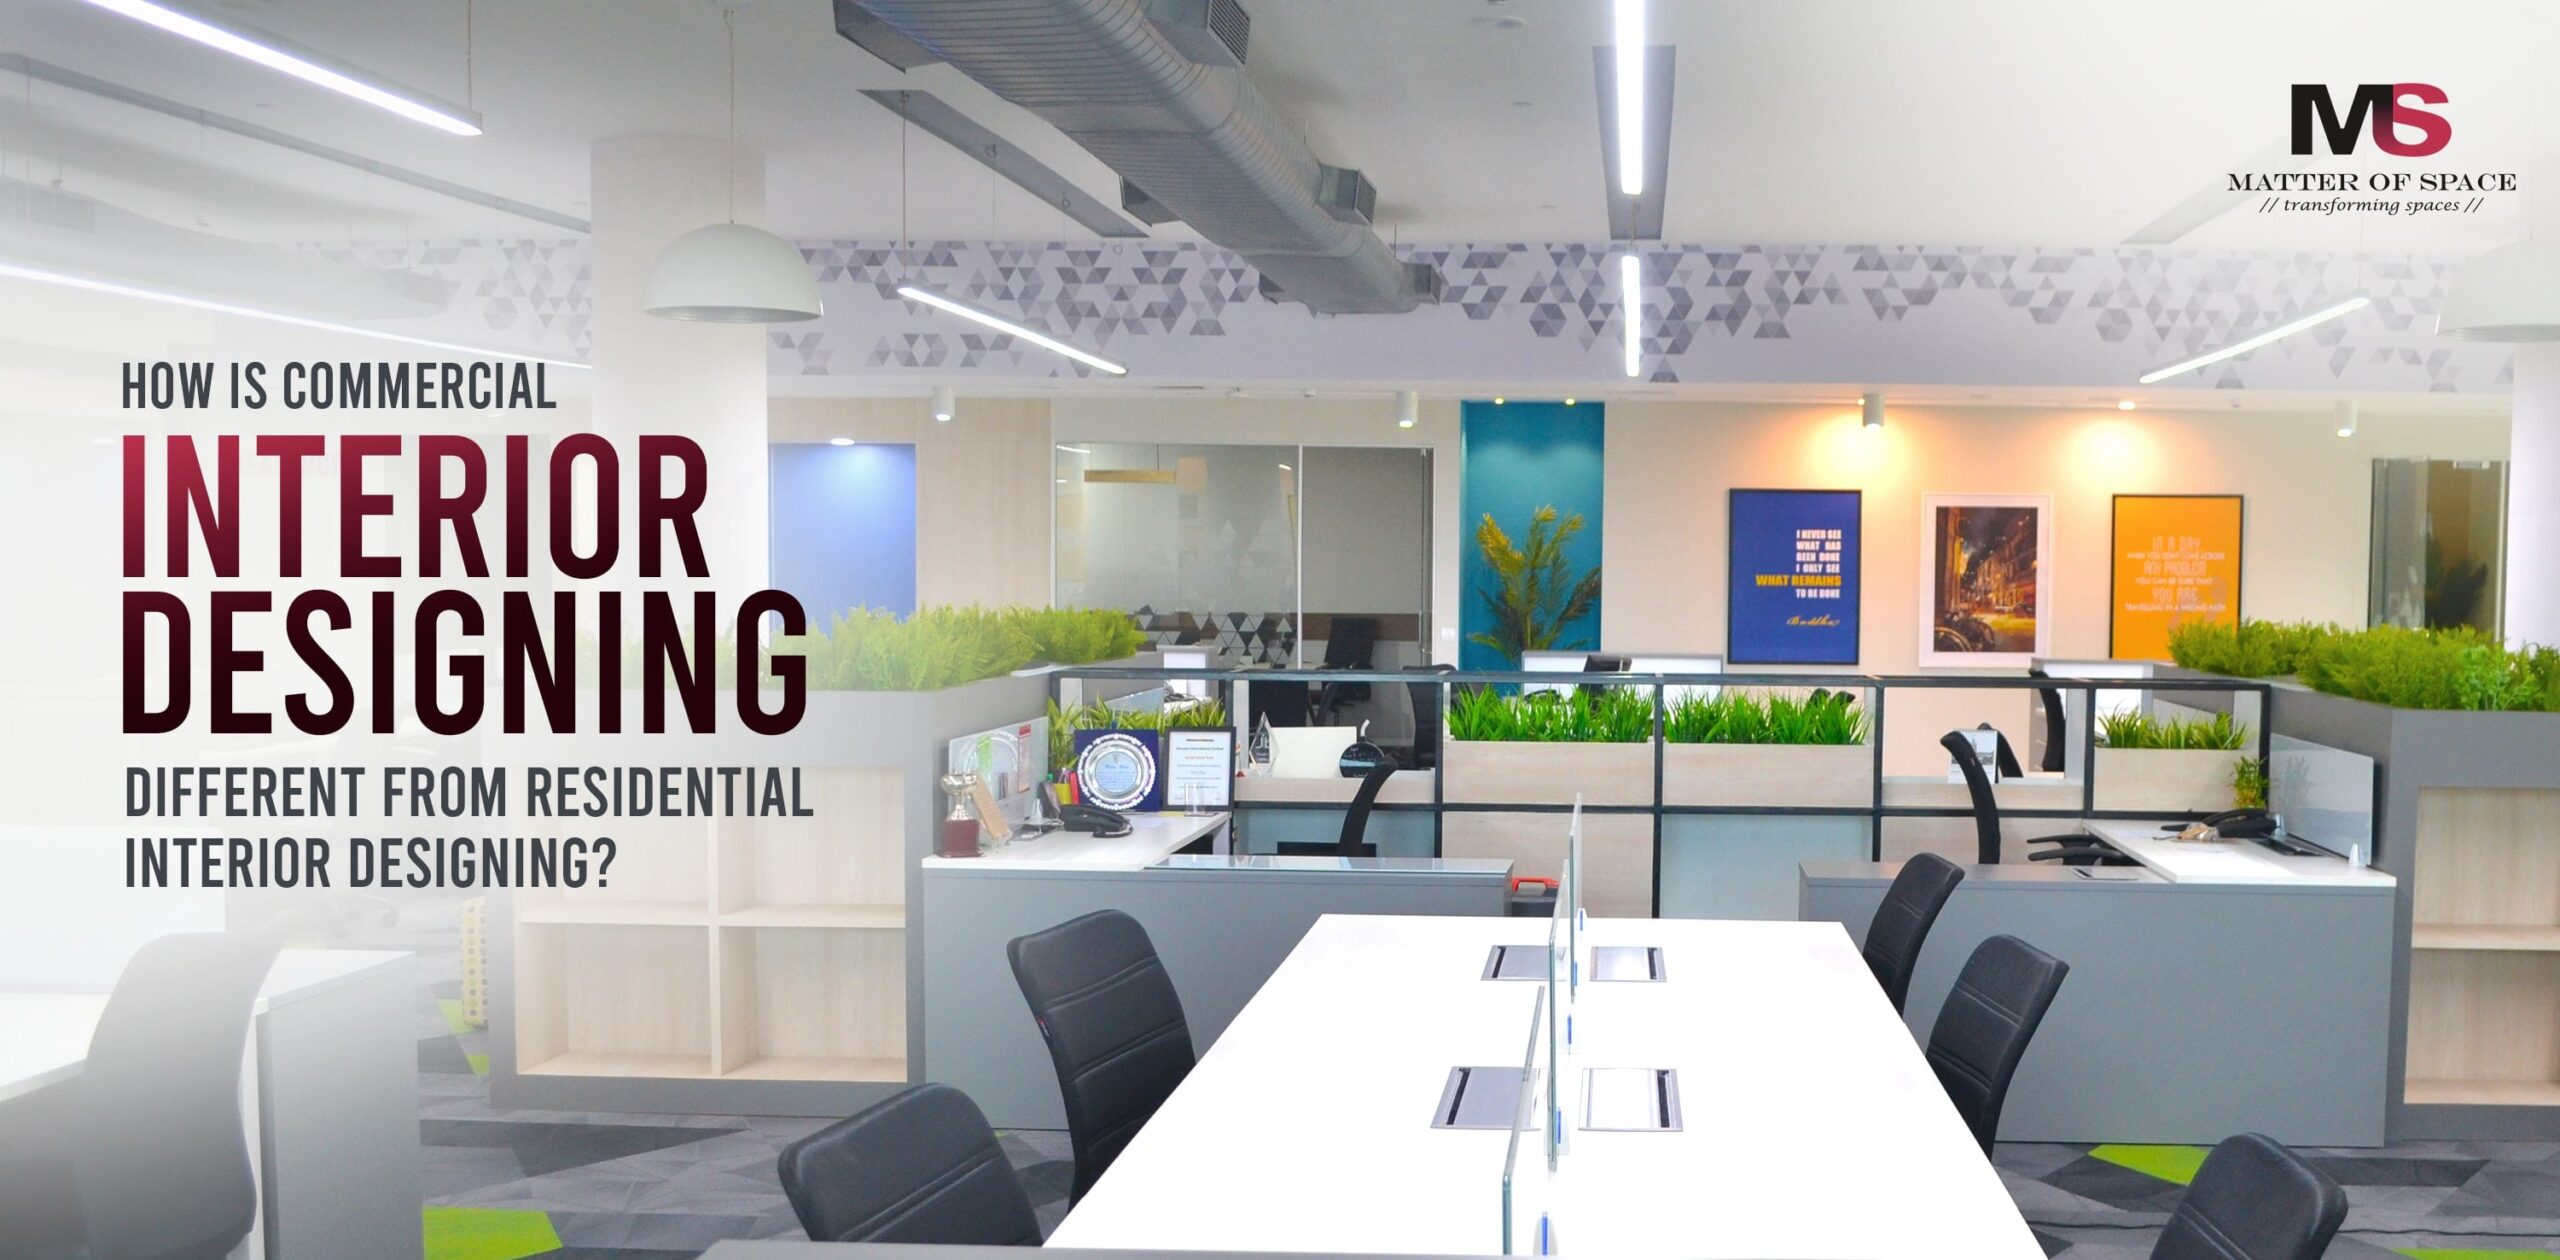 How is Commercial Interior Designing Different from Residential Interior Designing?